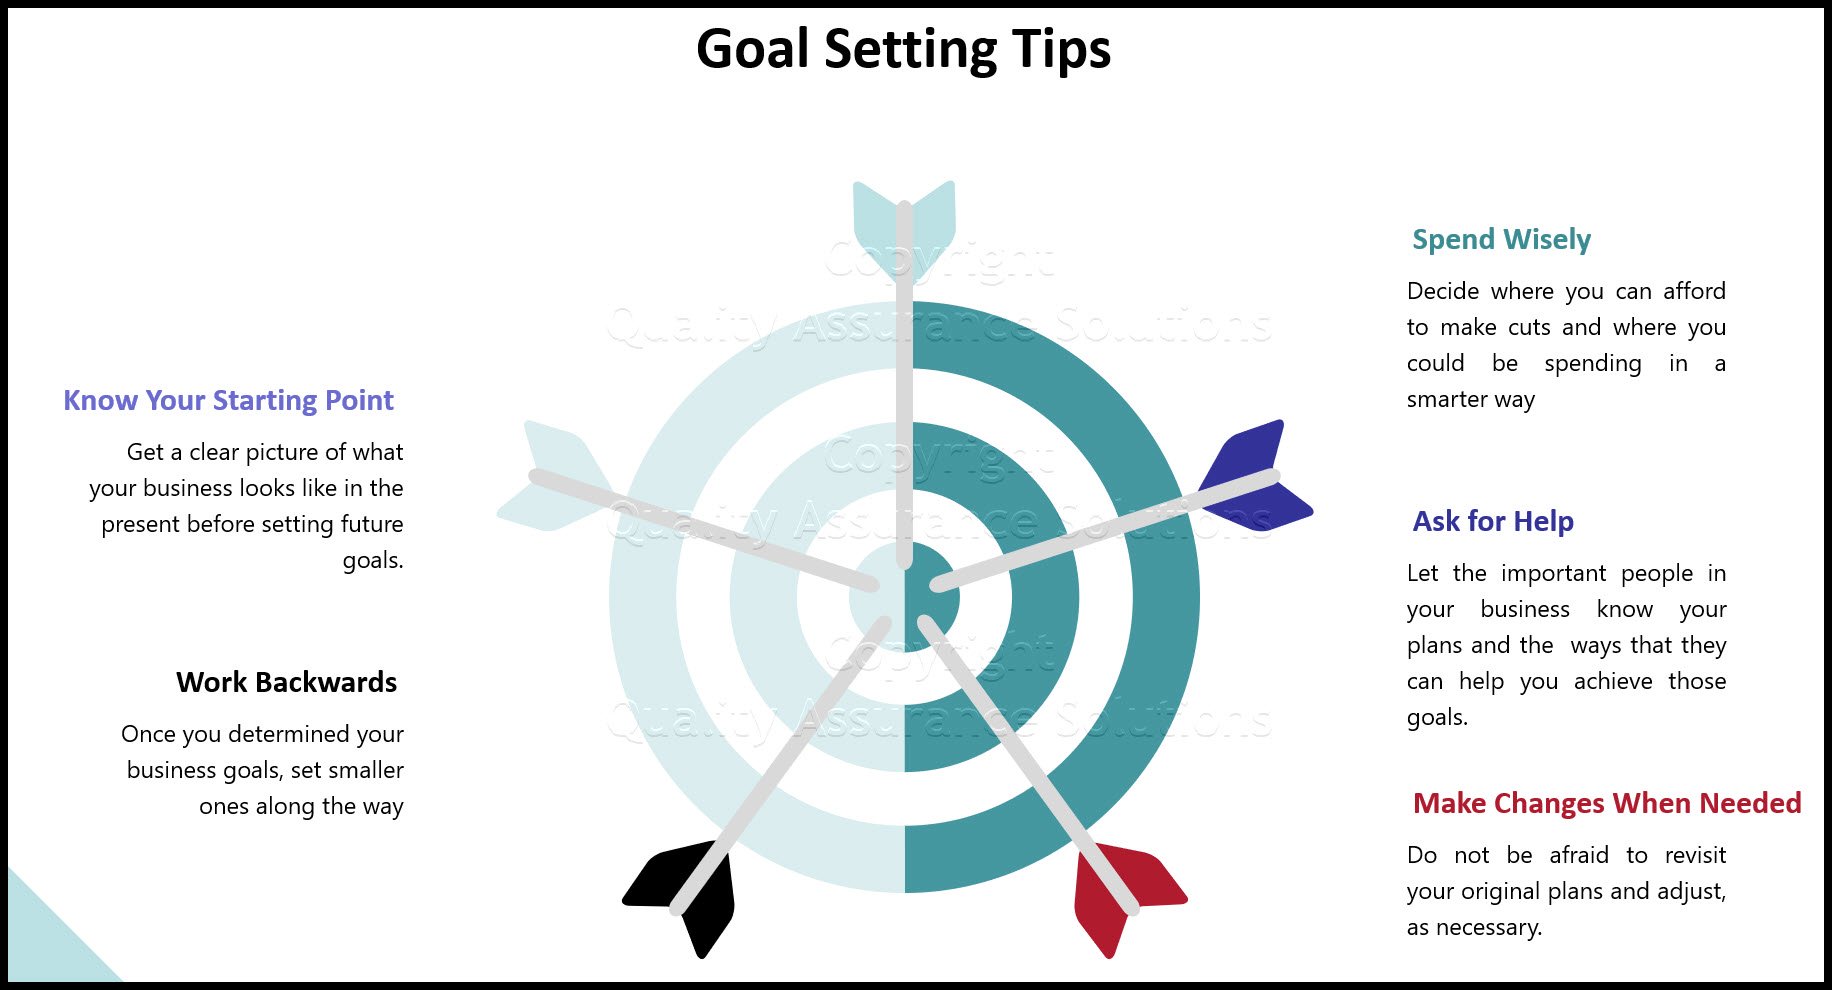 Goal setting 5 simple steps includes knowing your starting point, working backwards, wisely spending, asking for help and making changes when needed.